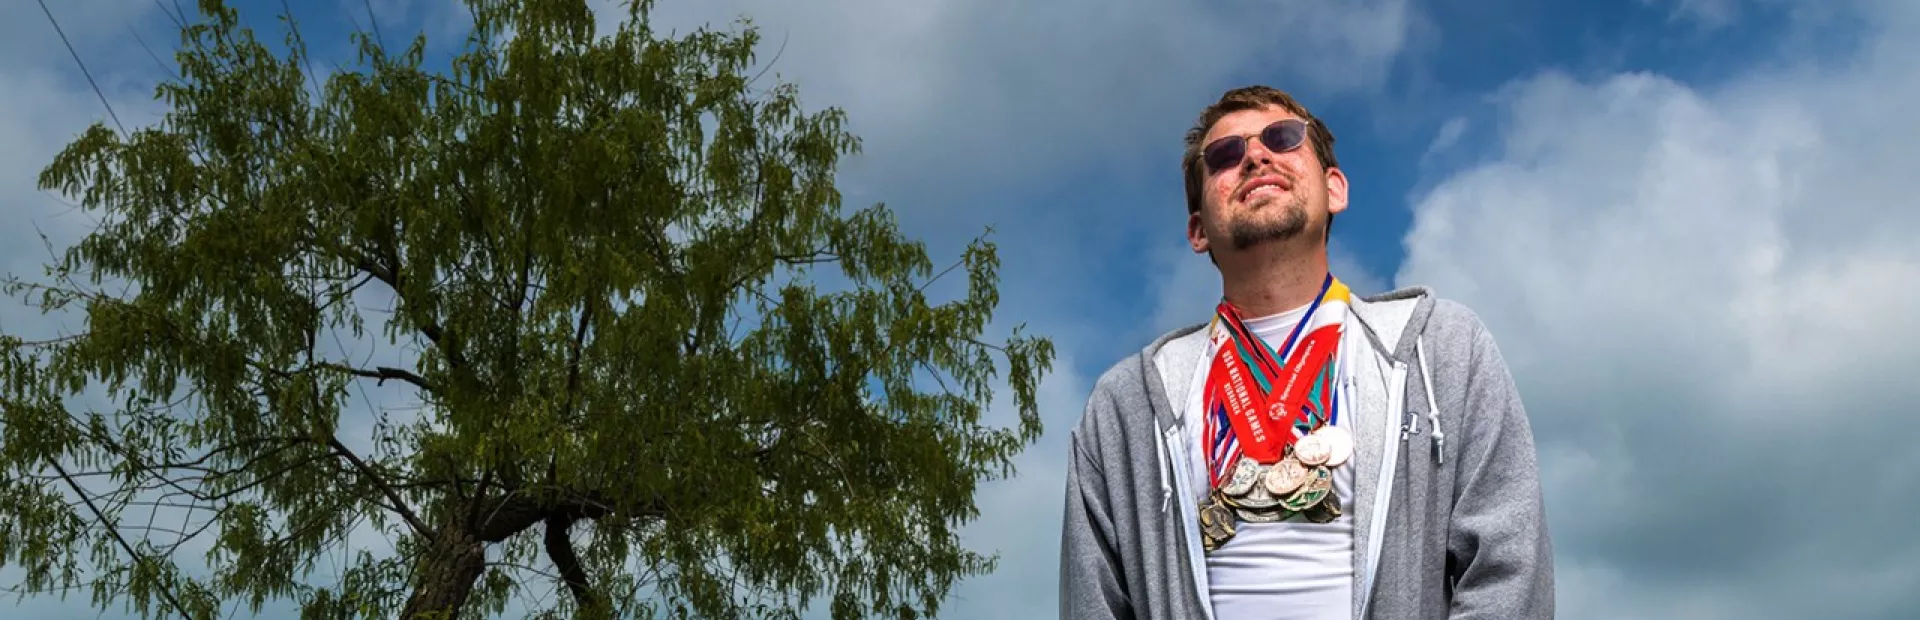 Special Olympian Ryan Groves suffers from TSC, a genetic condition that afflicts nearly 1 million patients worldwide.